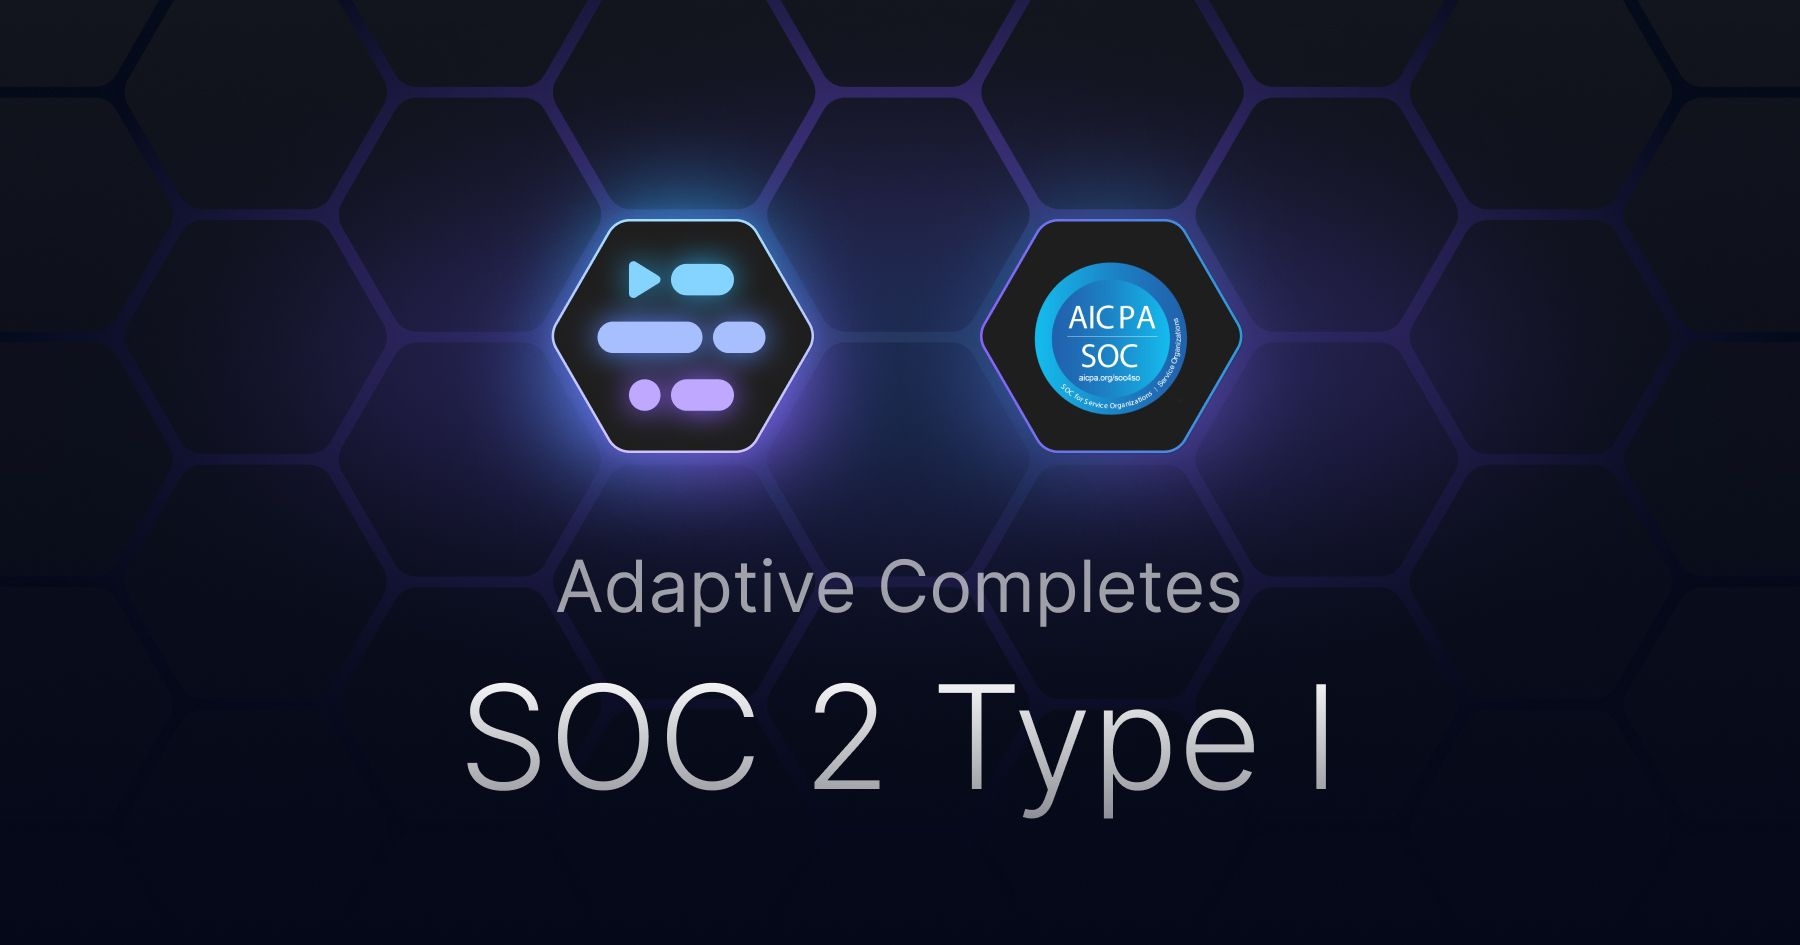 Adaptive has completed SOC 2 Type I Audit